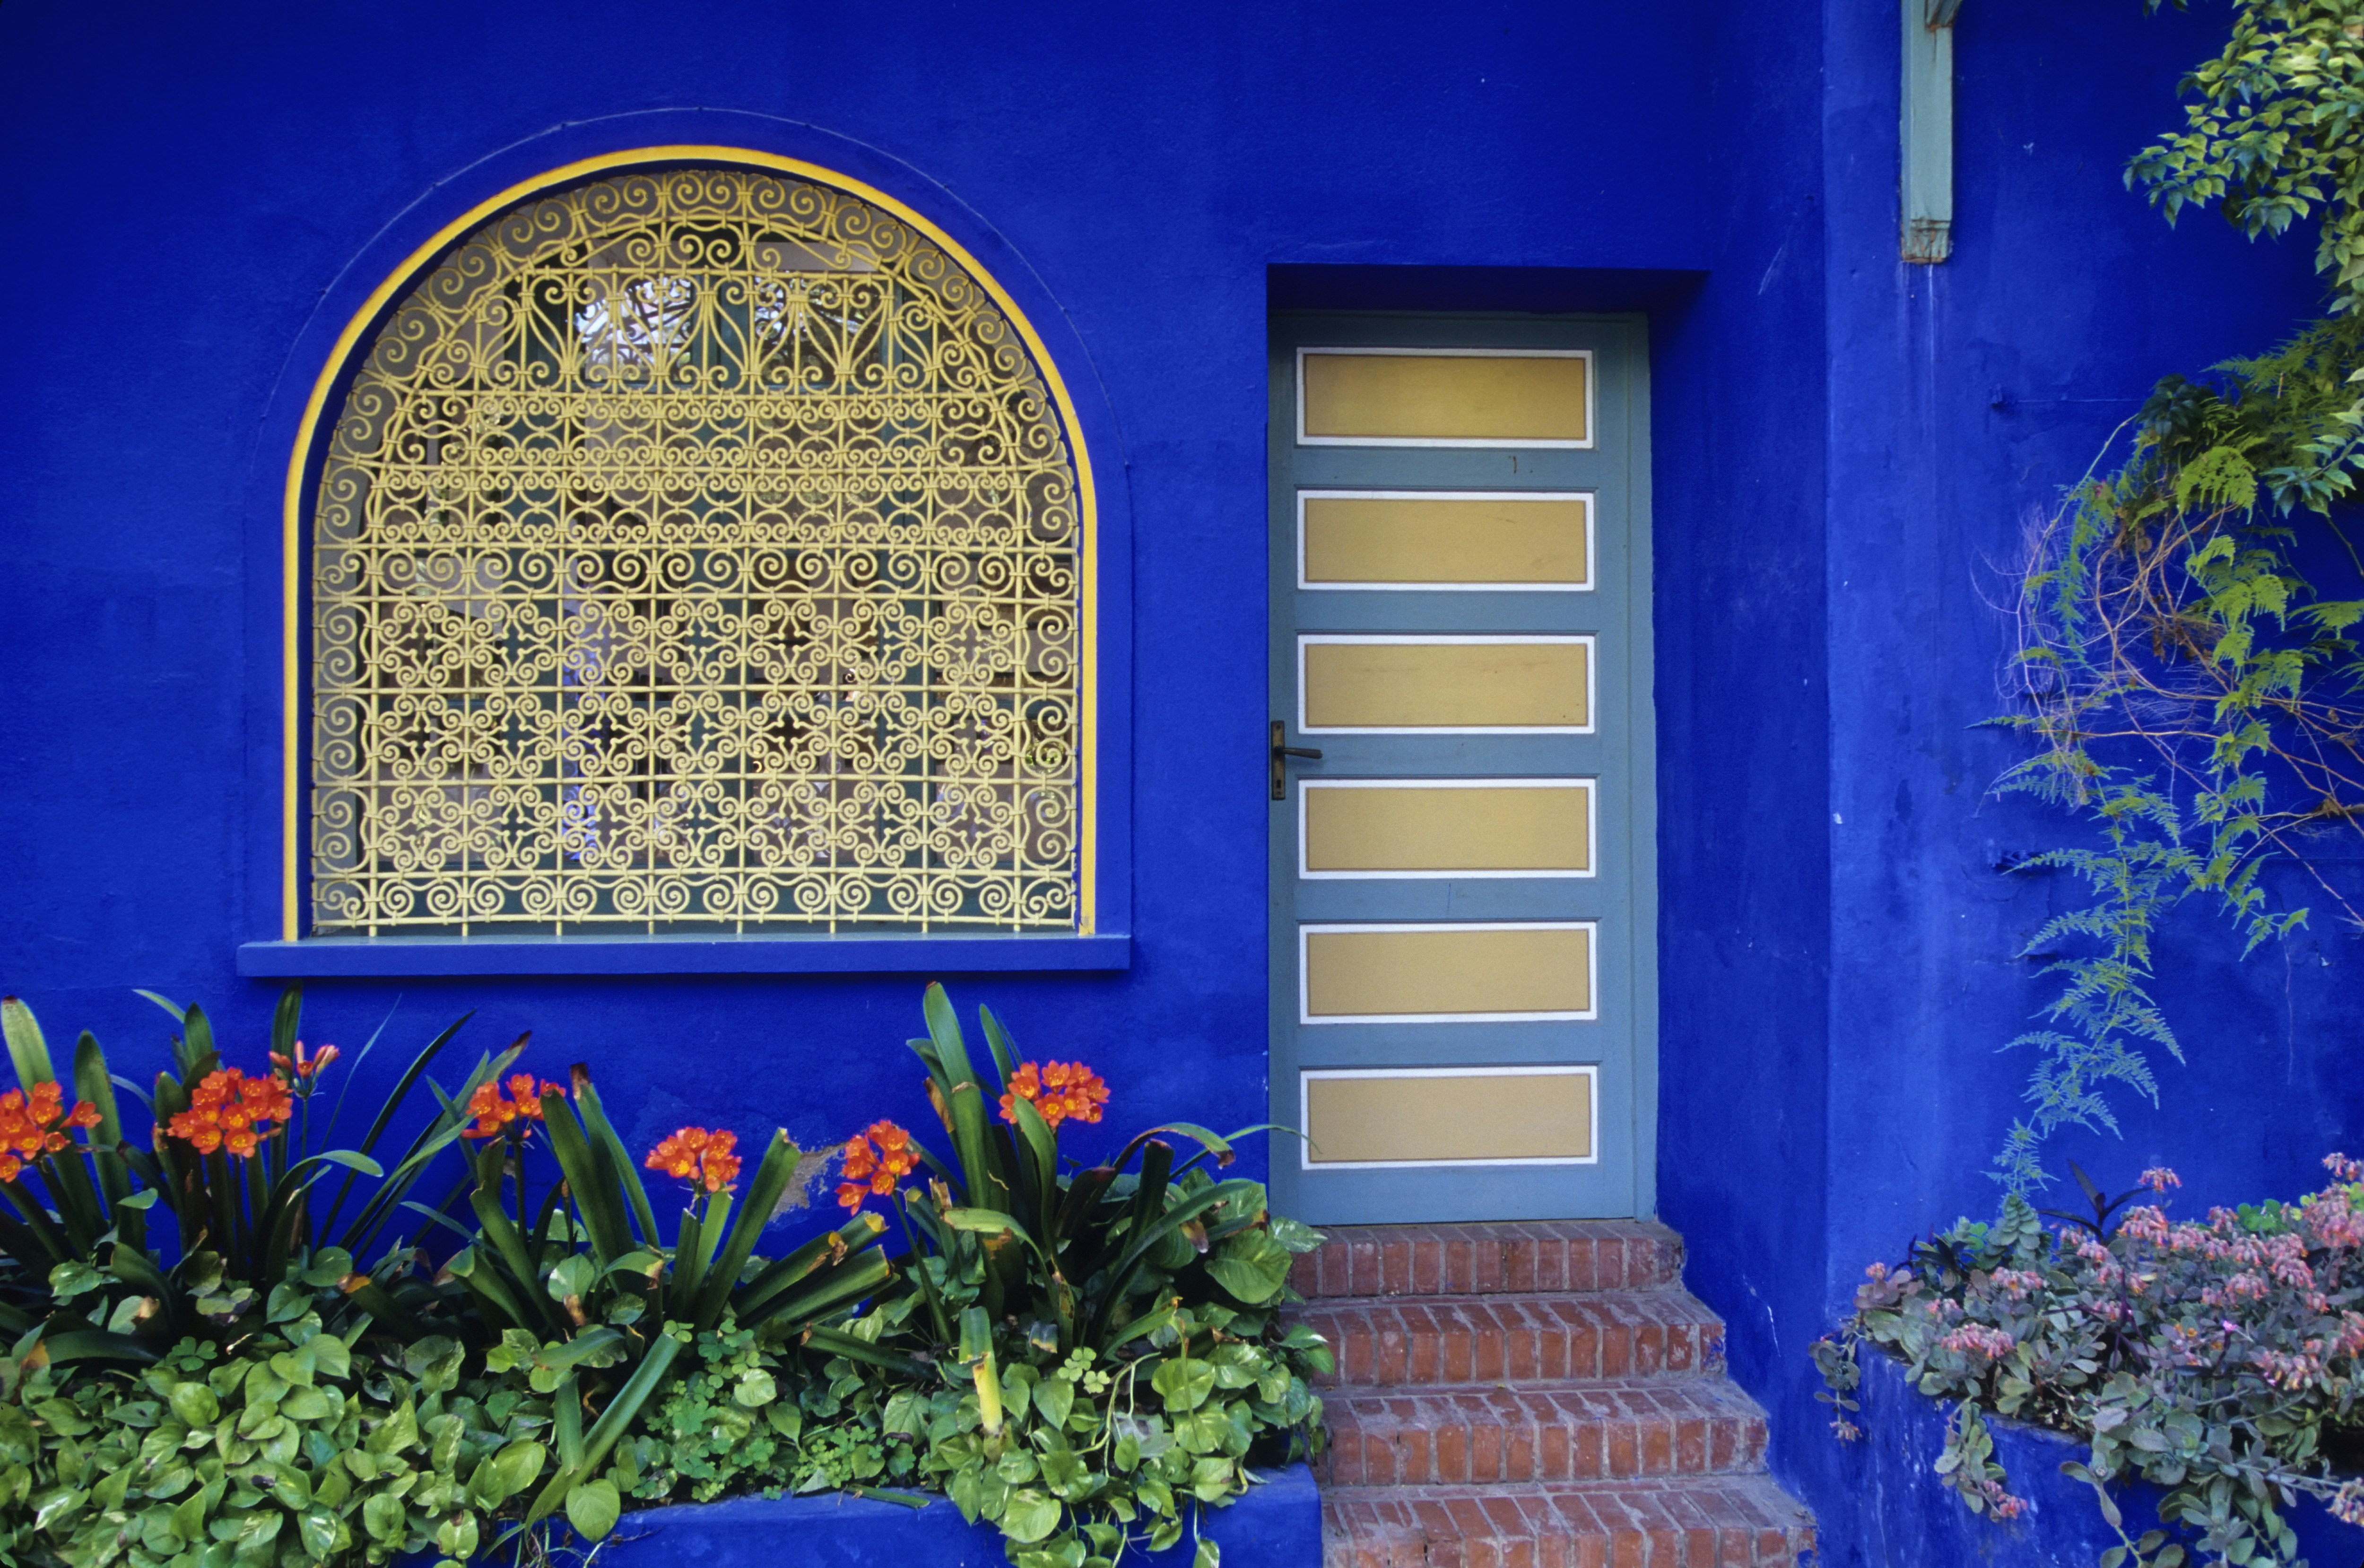 Blue and yellow exterior of a building in Jardin Majorelle, Marrakesh